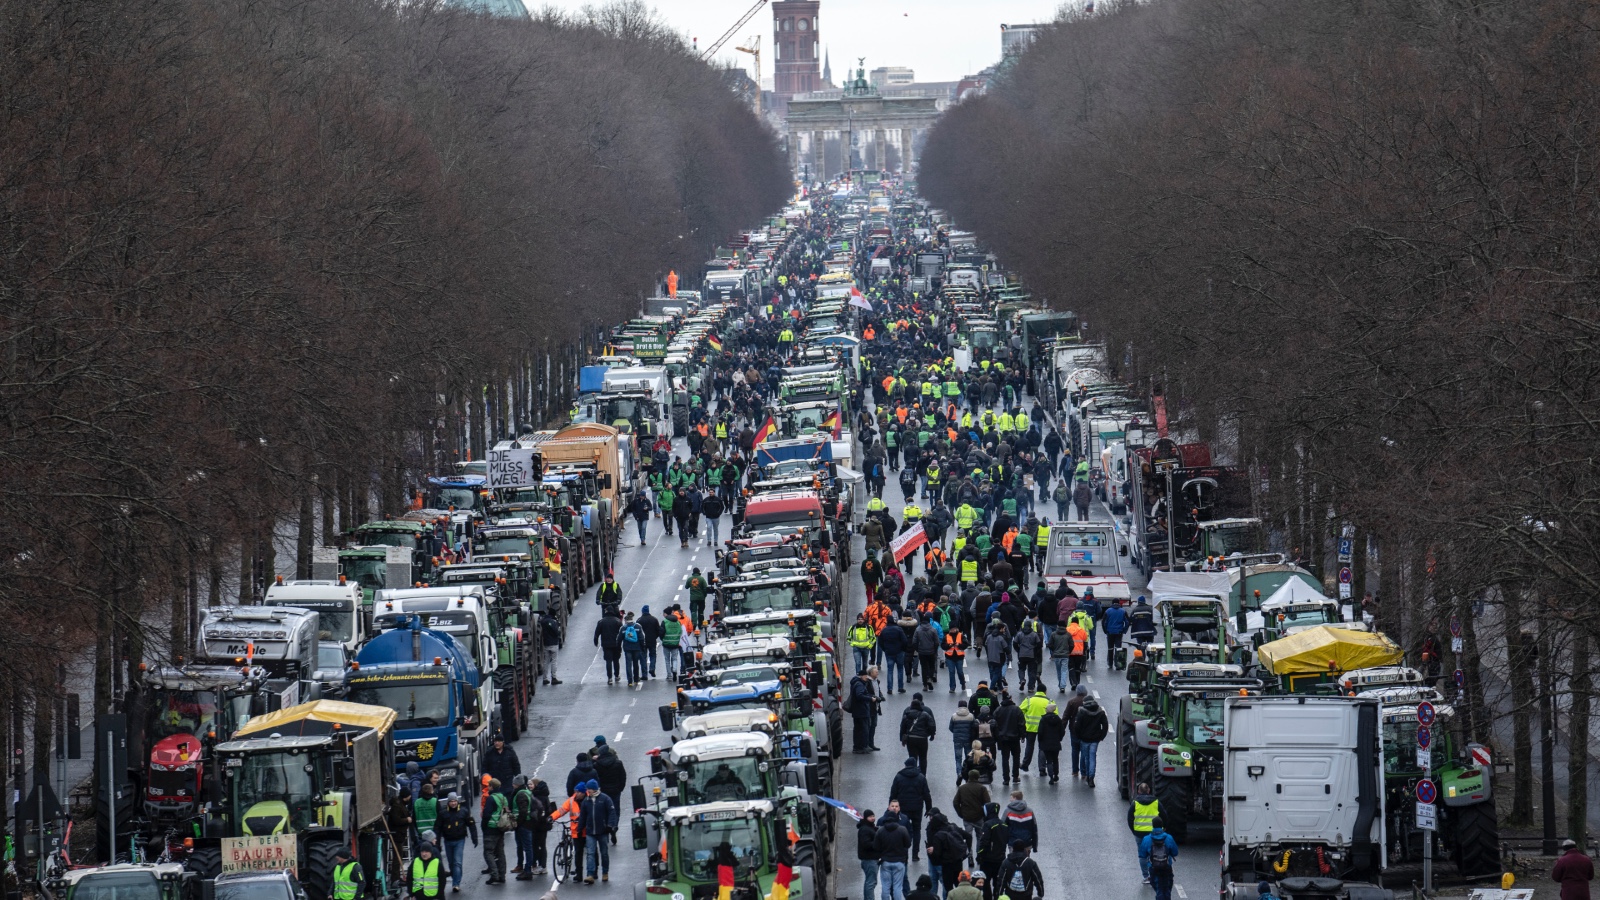 A long line of farmers and tractors blocks the boulevard leading to Brandenburg Gate in the background